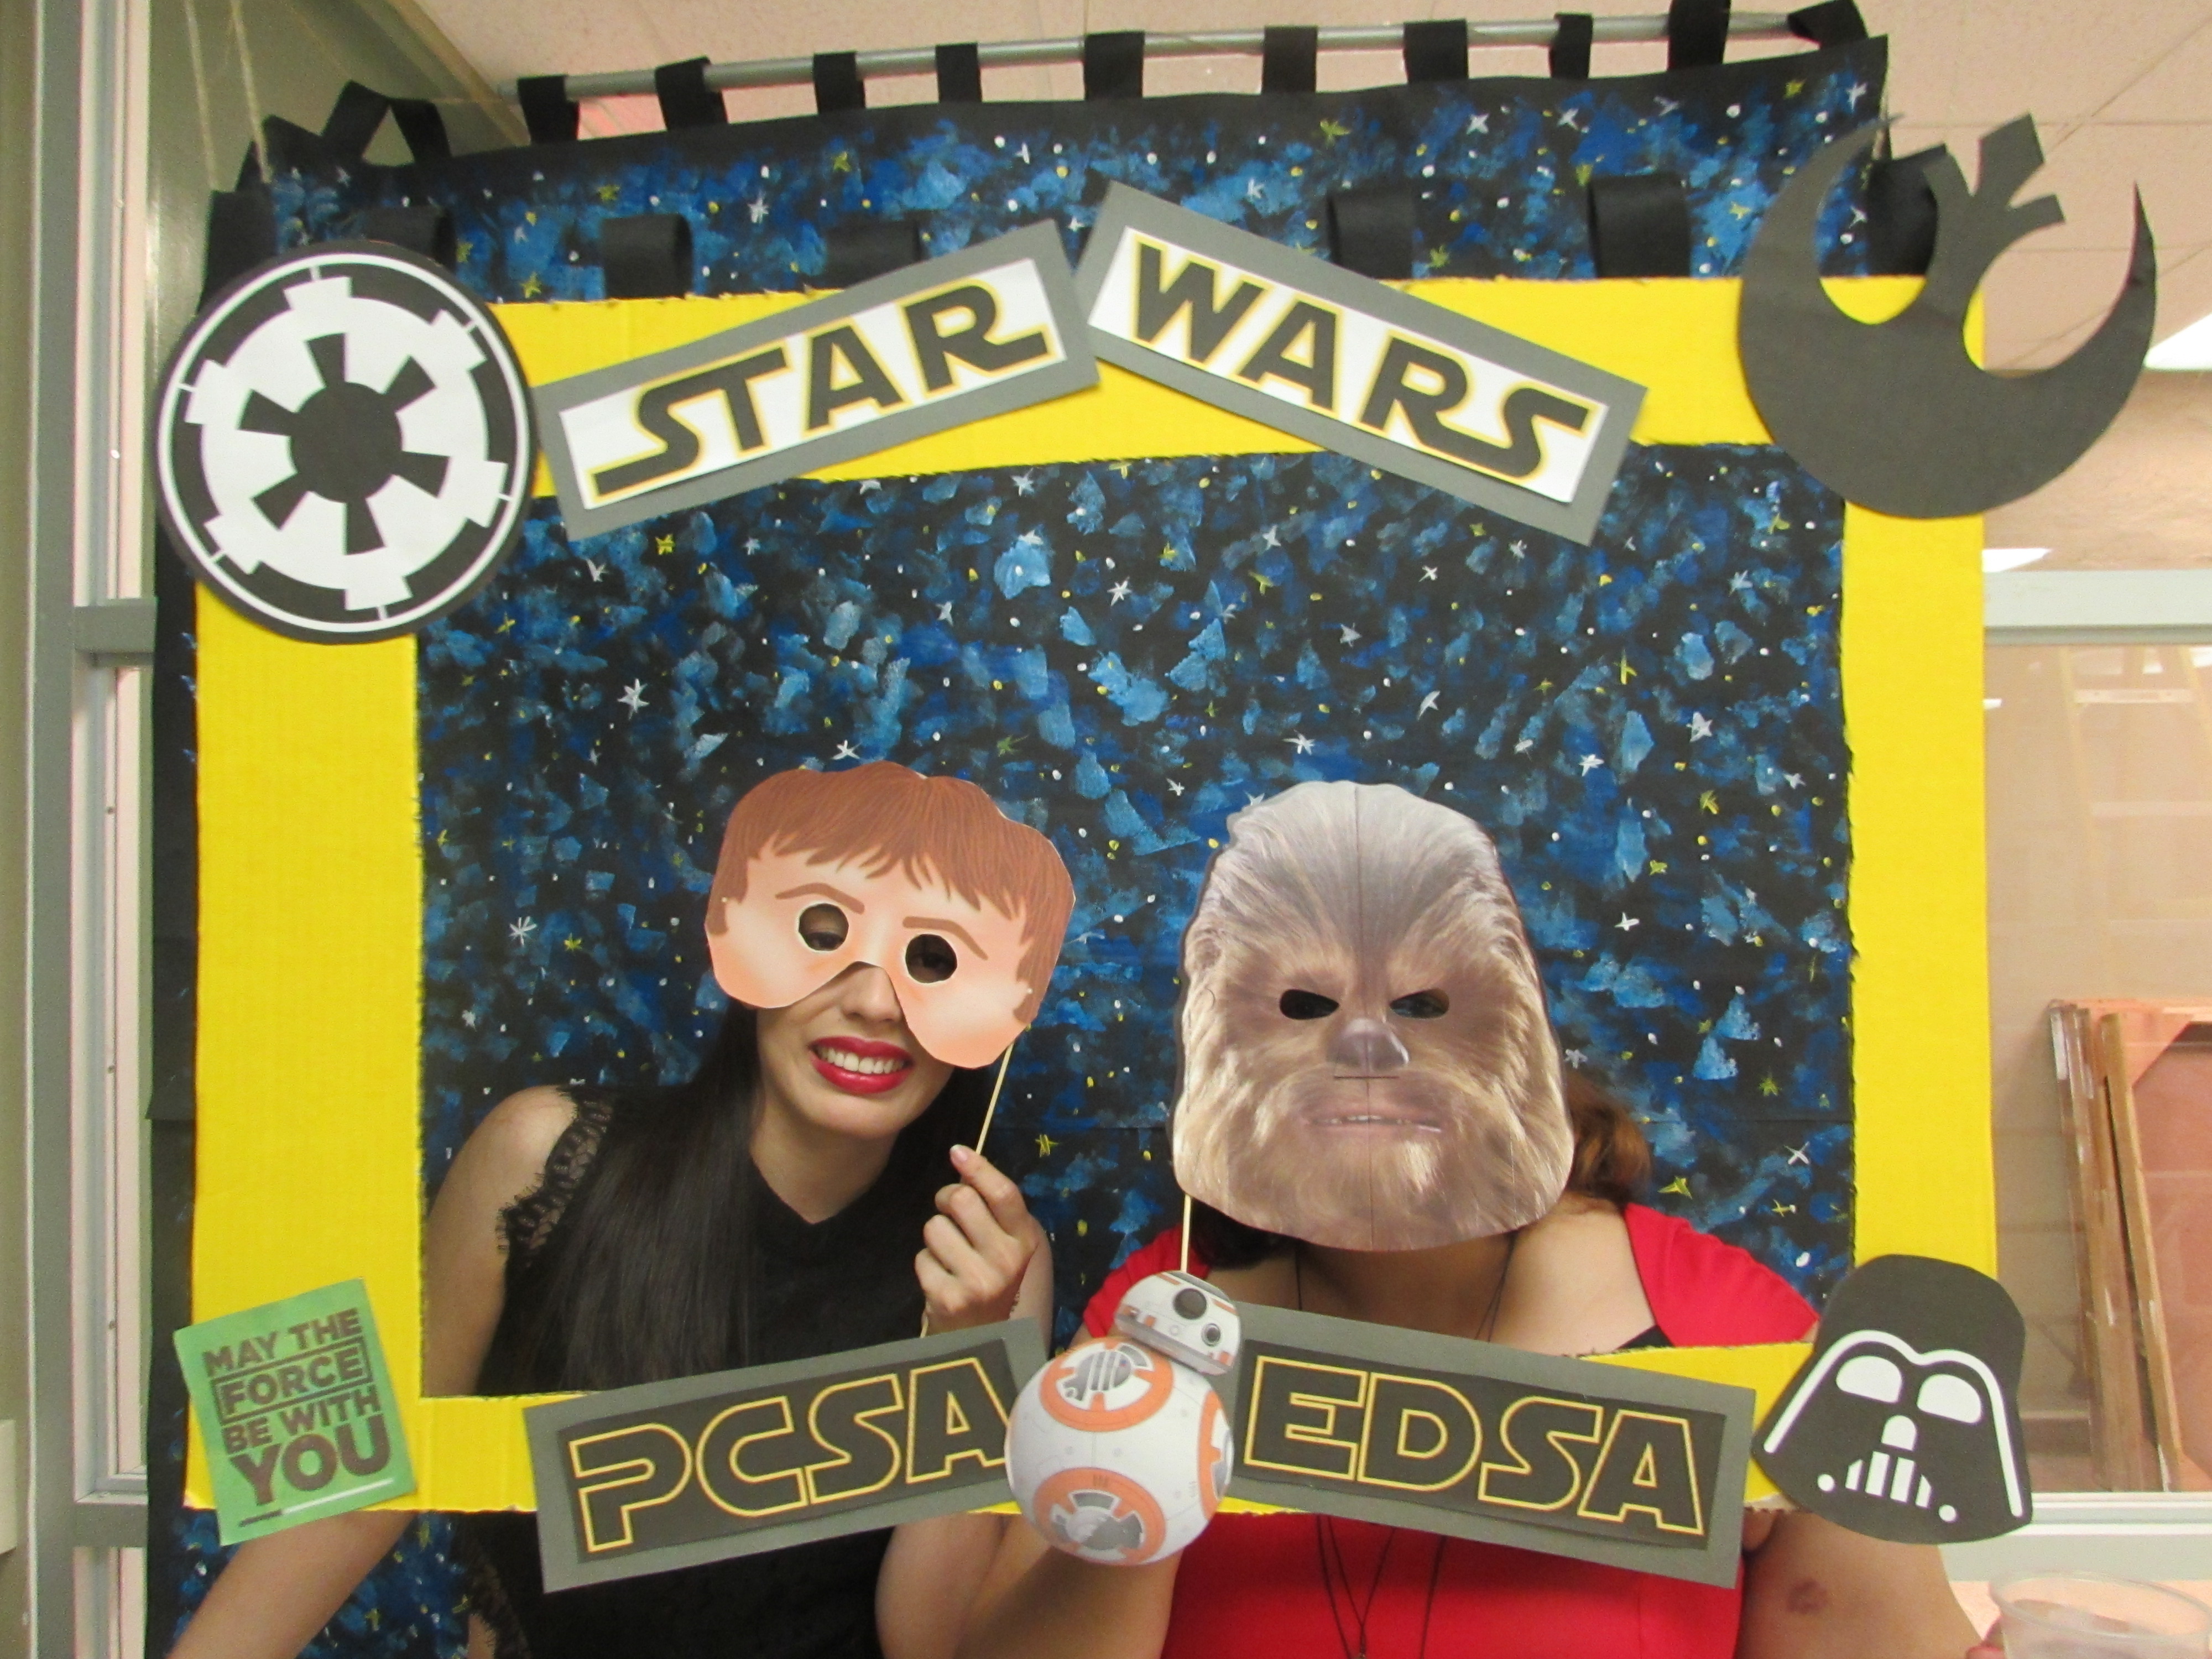 Attendants of the joint activity of May the 4th Be with you by EDSA & PCSA posing for the camera while holding up a promotional frame for PCSA and EDSA and wearing masks.